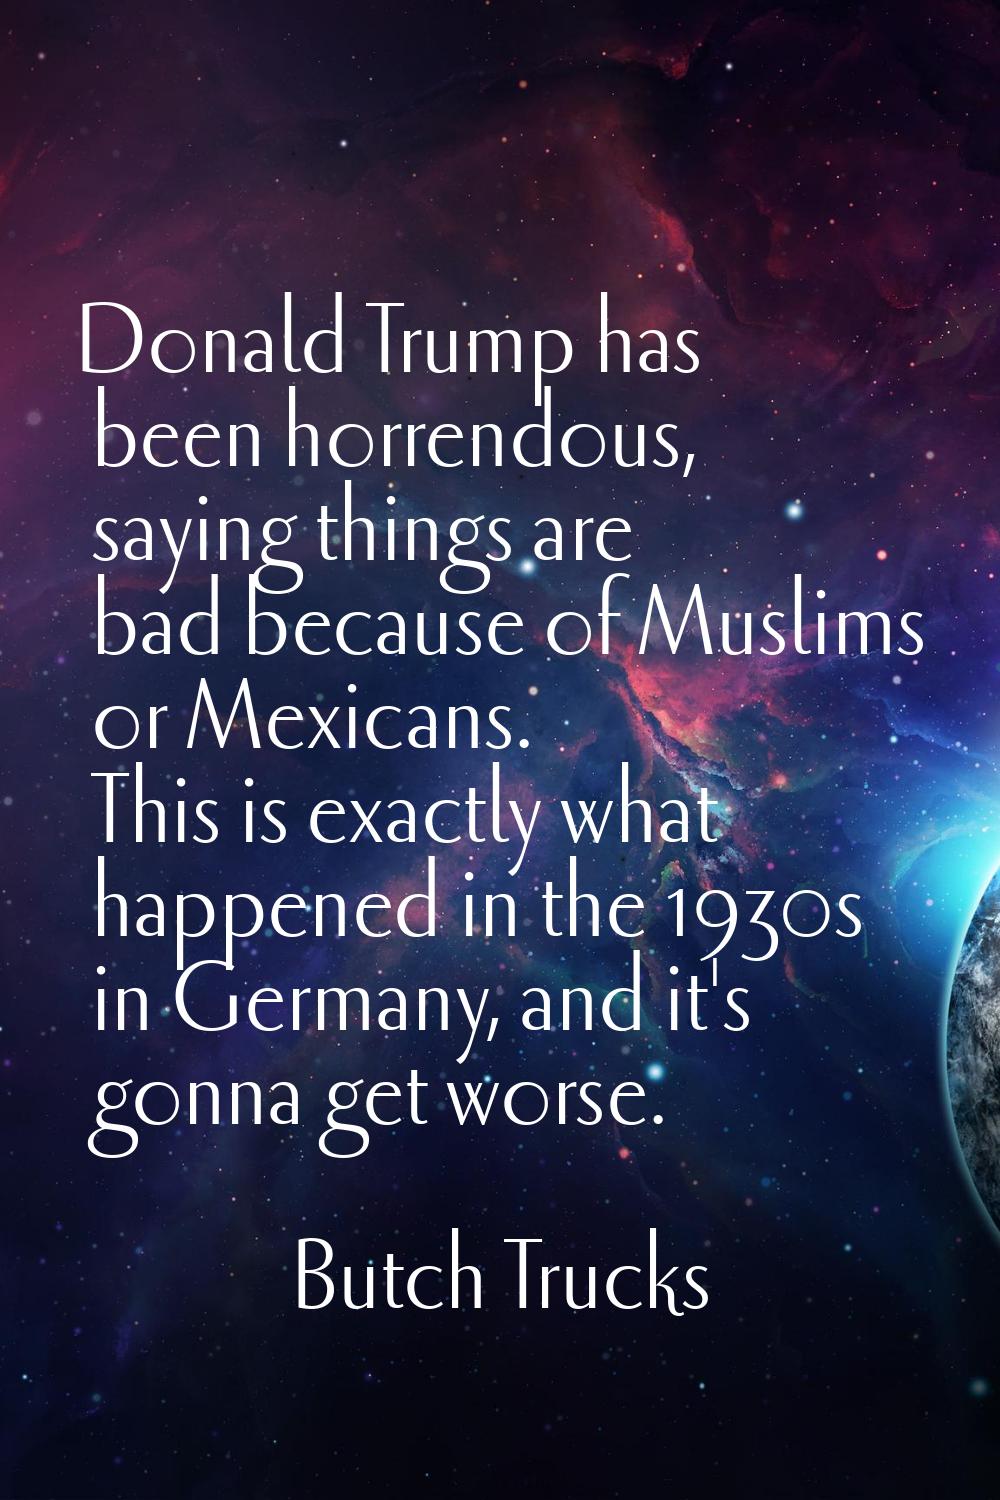 Donald Trump has been horrendous, saying things are bad because of Muslims or Mexicans. This is exa